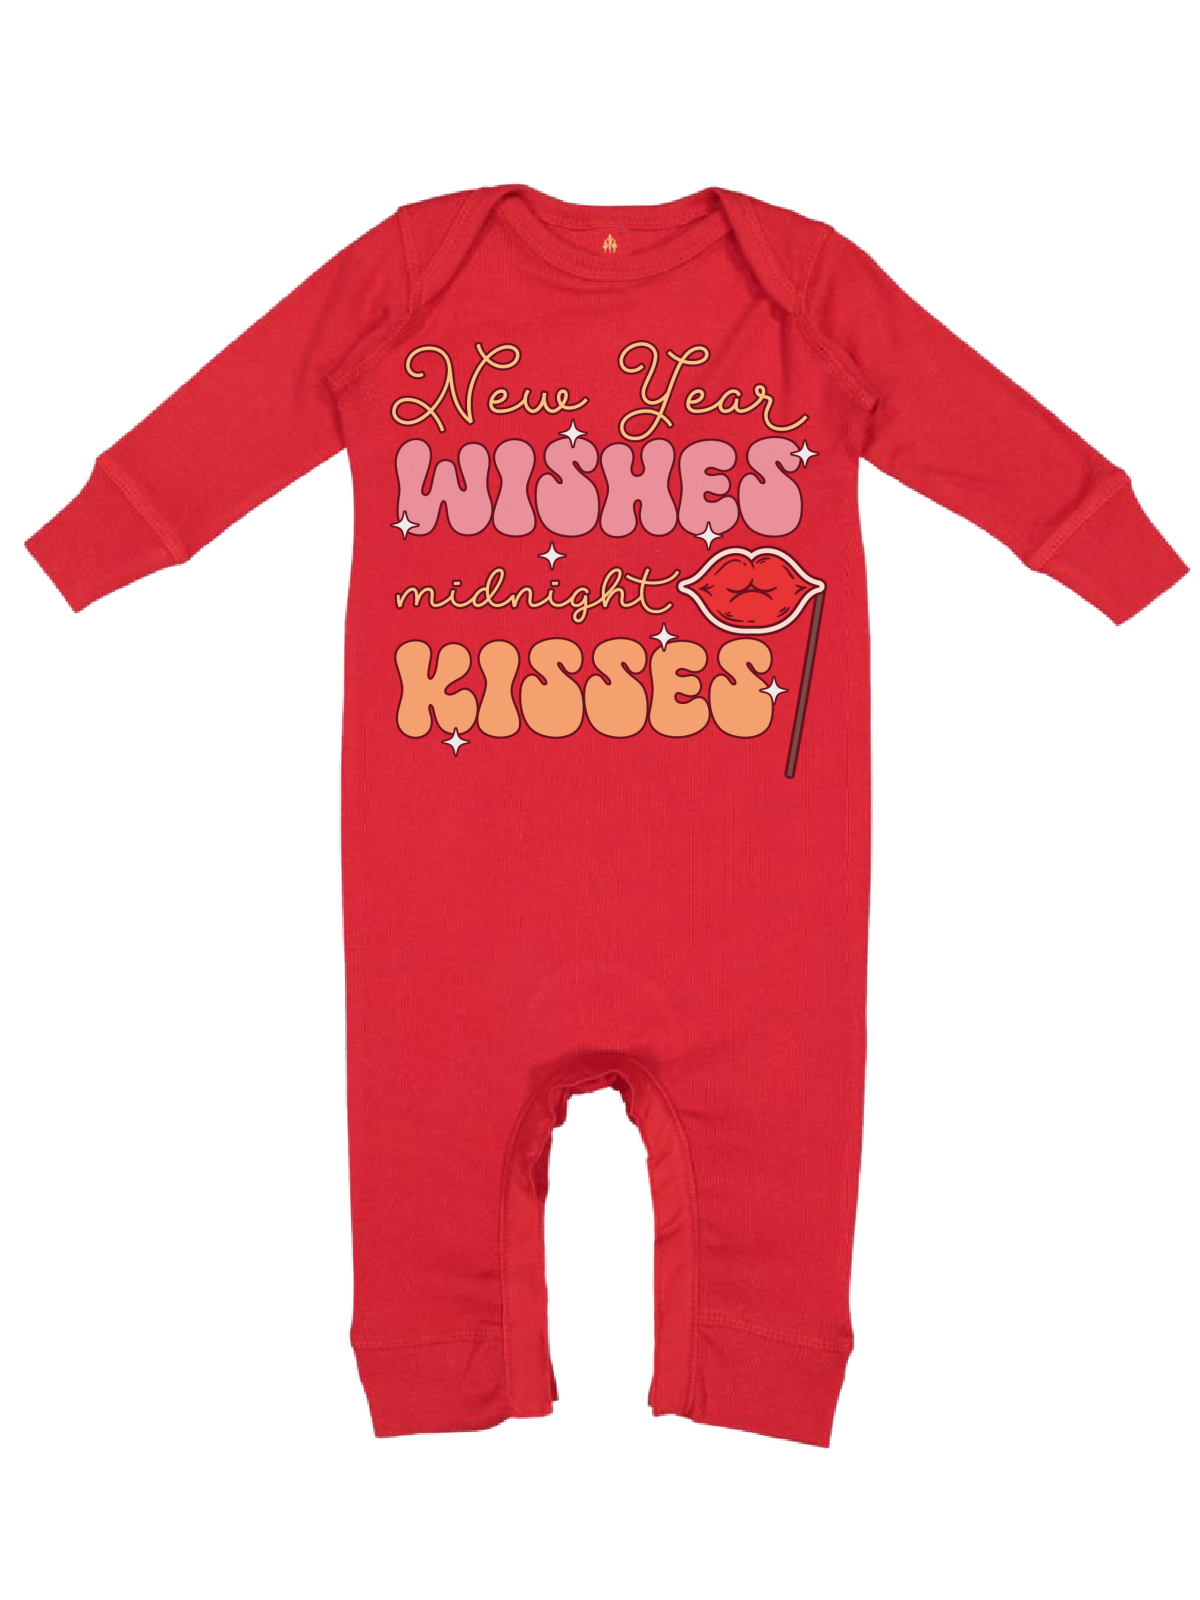 New Year Wishes Midnight Kisses Baby Coverall